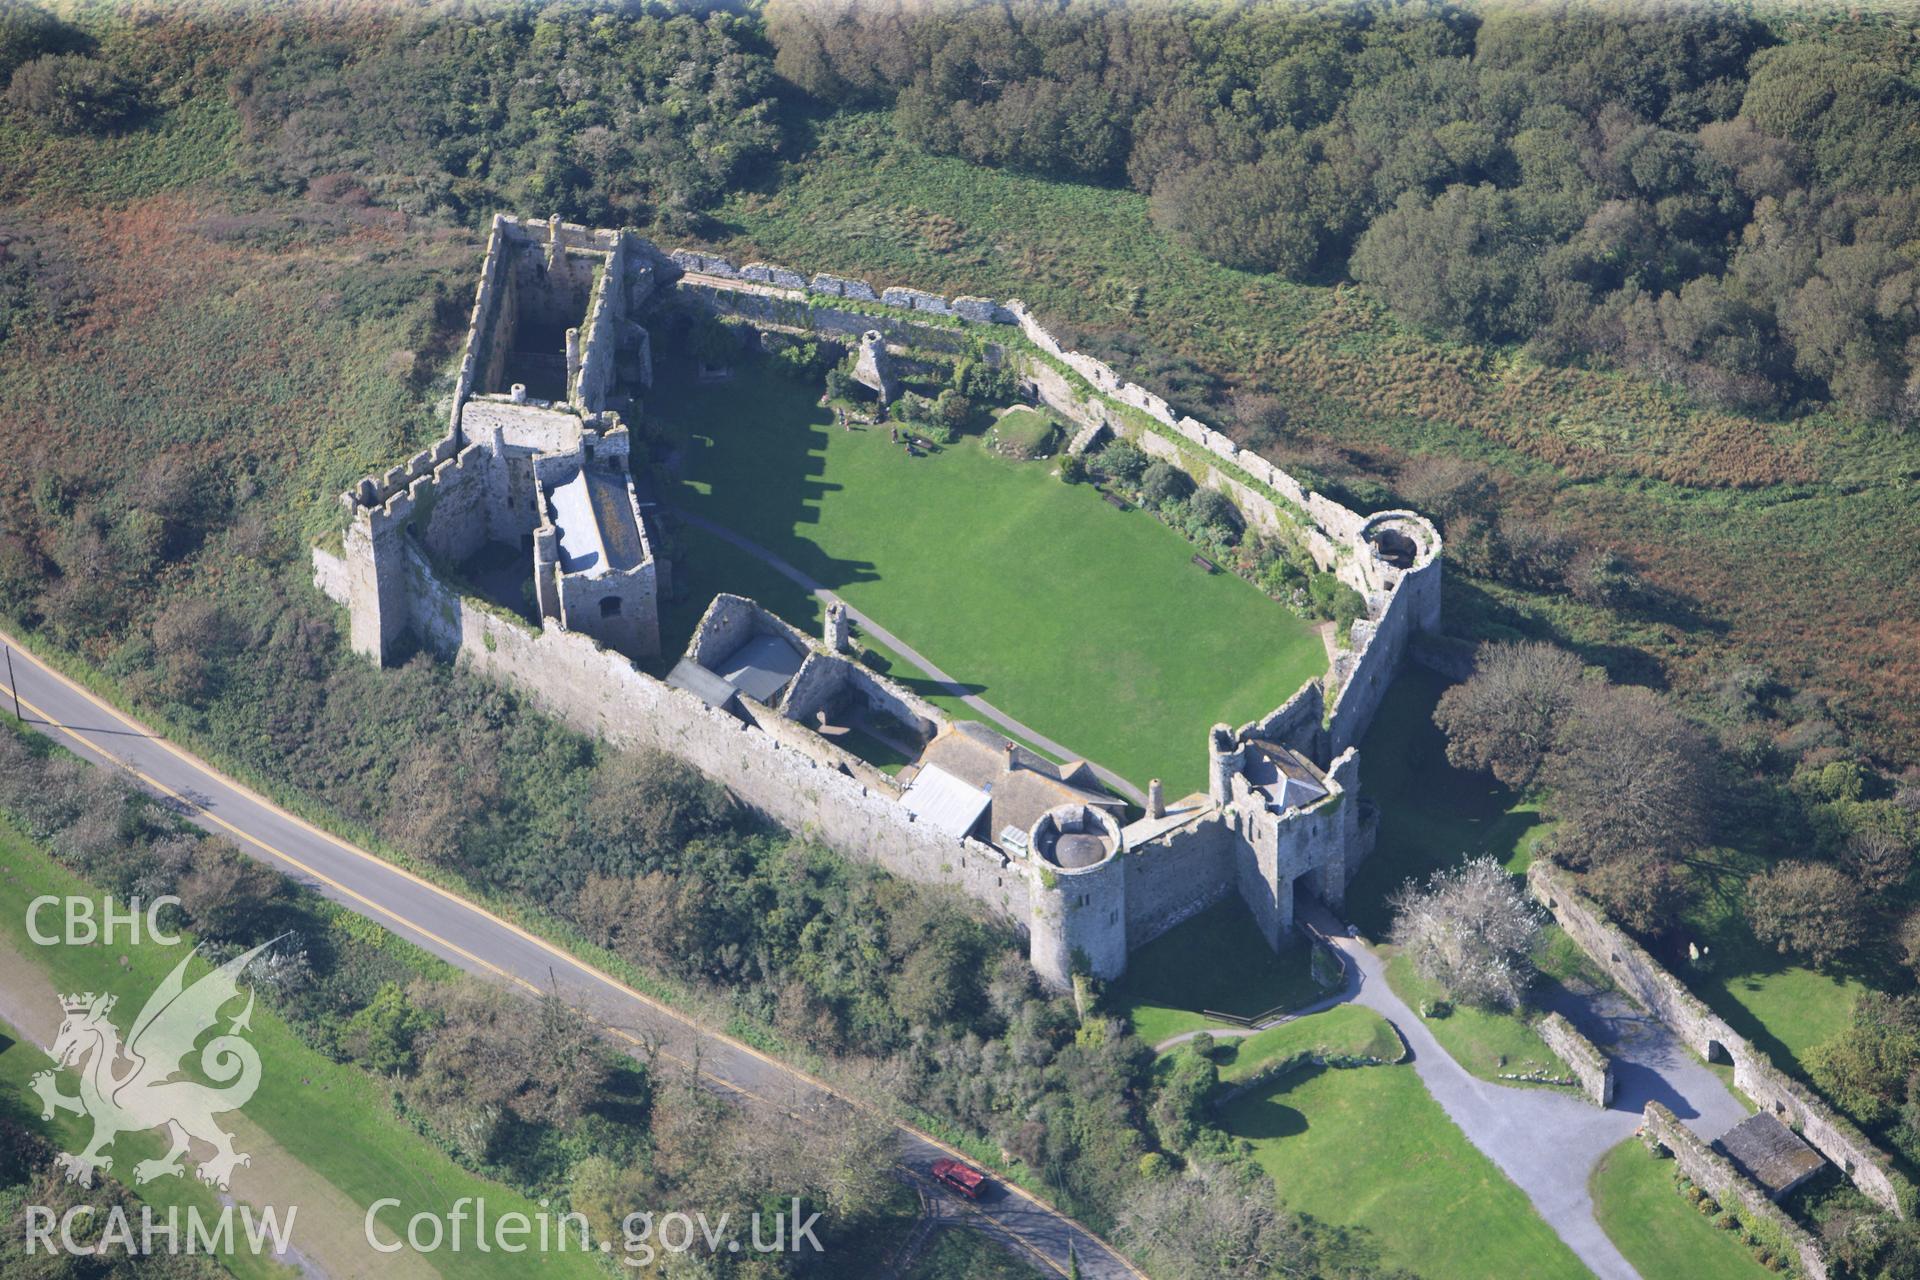 RCAHMW colour oblique photograph of Manorbier Castle, viewed from the east. Taken by Toby Driver and Oliver Davies on 28/09/2011.